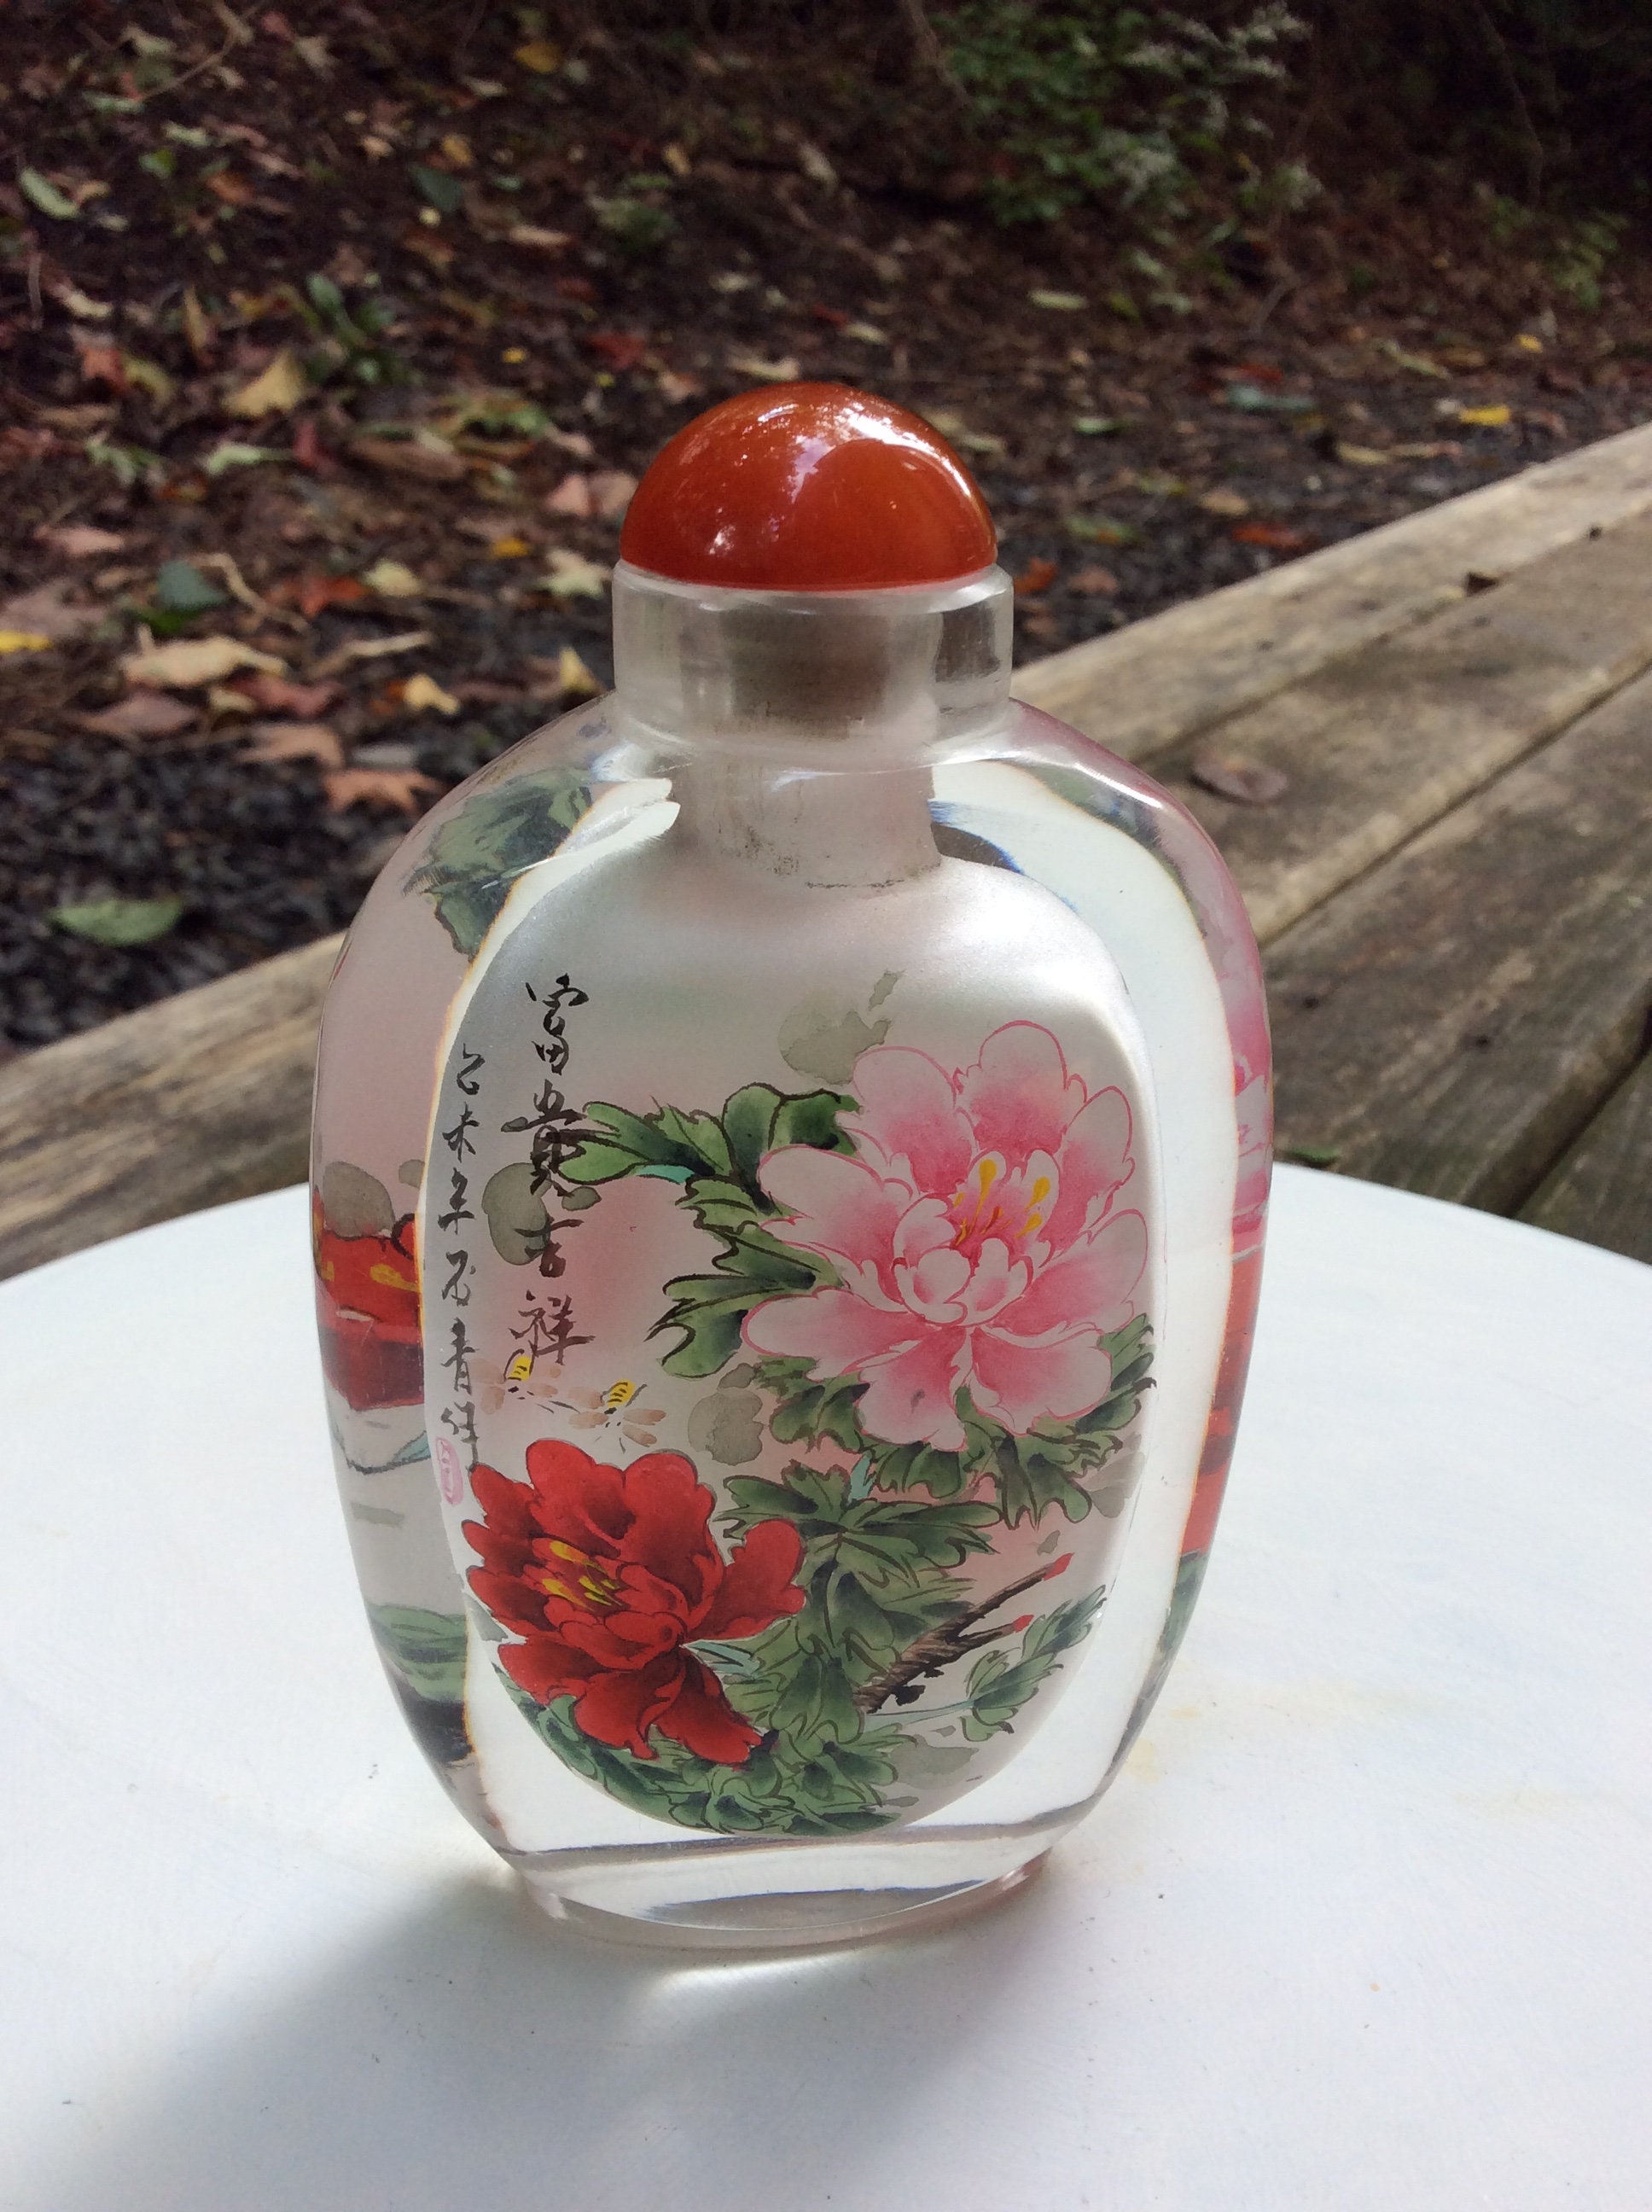 HAND PAINTED Peking Glass Snuff Bottle, Reverse Painting Inside the Bottle,  White Jade Lid, 1900s, A-1 